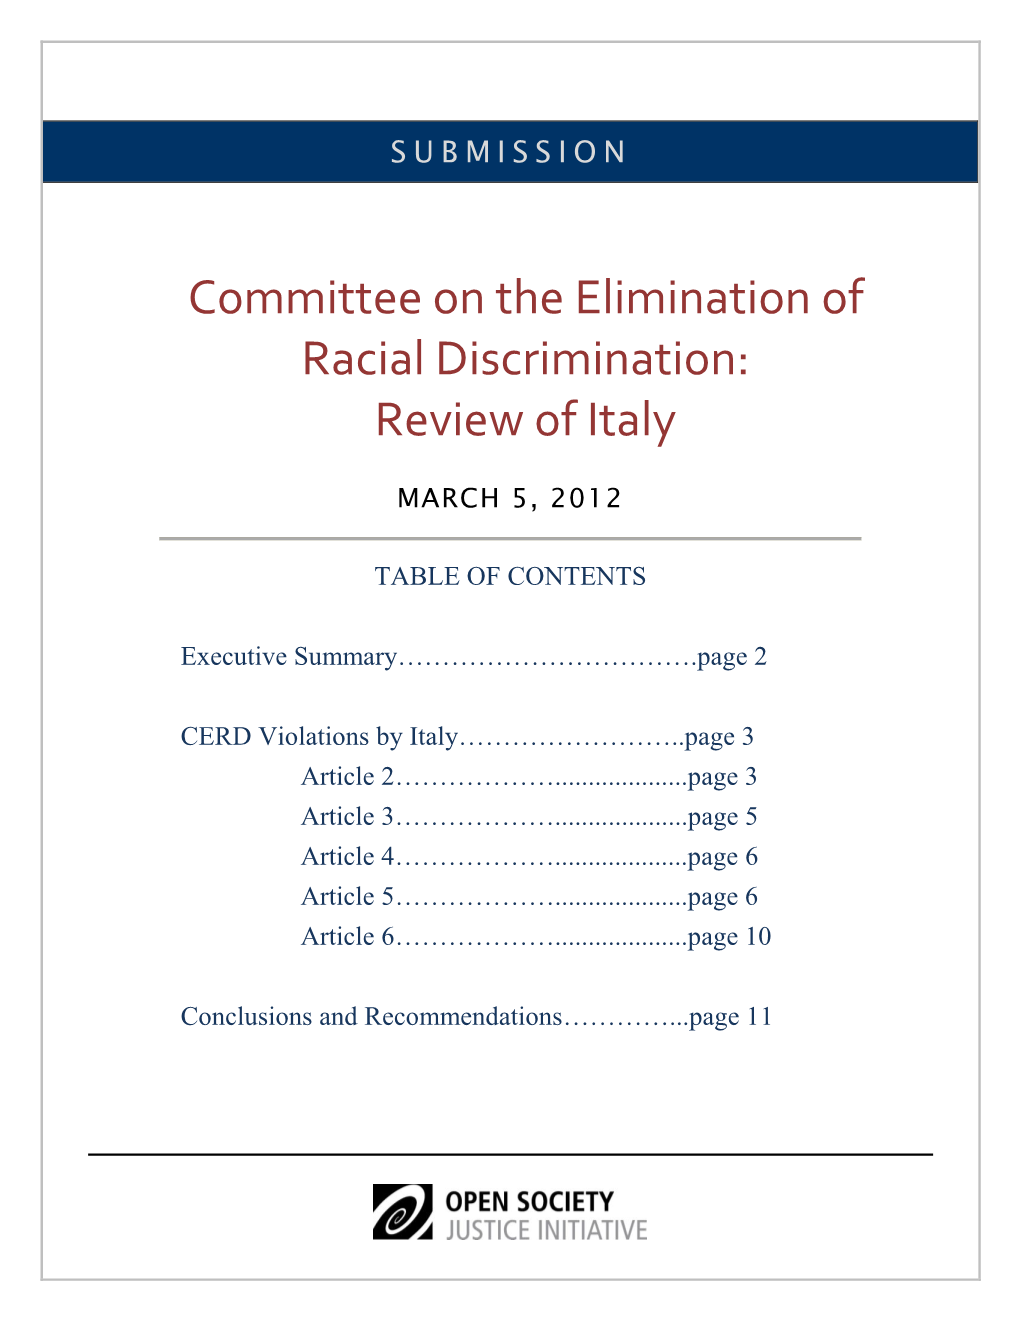 Committee on the Elimination of Racial Discrimination: Review of Italy